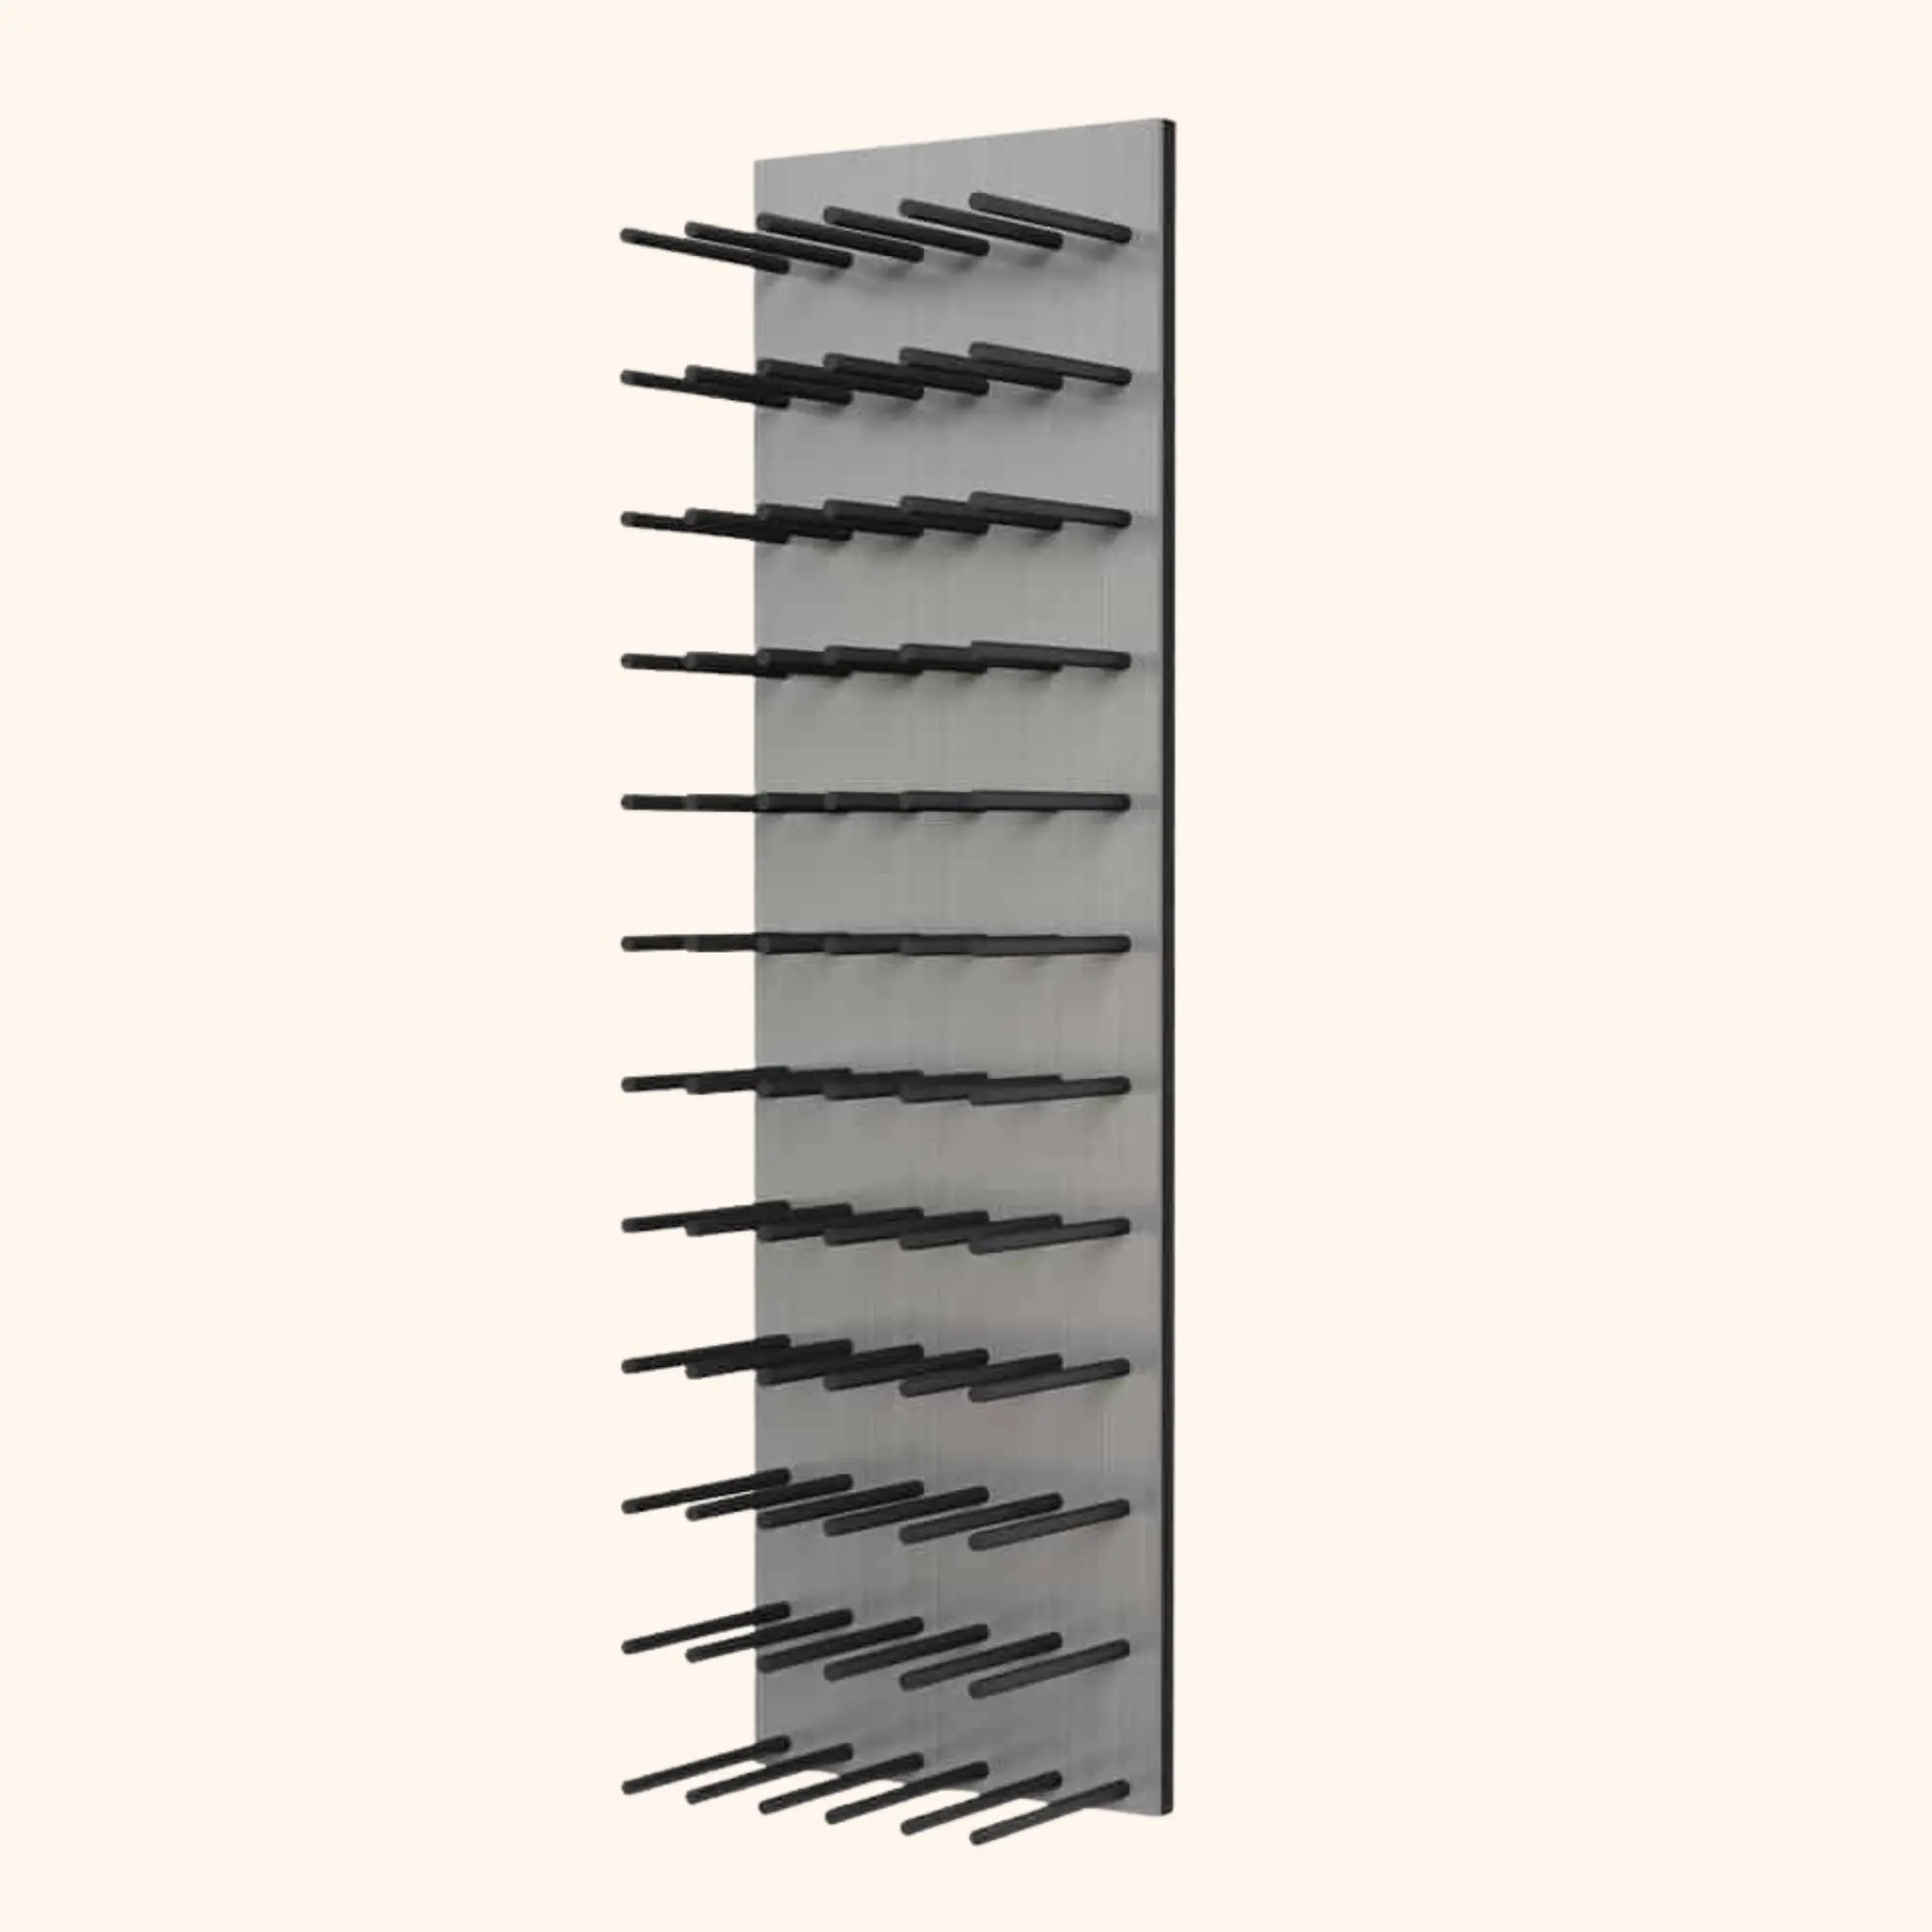 Ultra Wine Racks & Cellars | Fusion ST Cork-Out Wine Wall Alumasteel (4 Foot) Ultra Wine Racks & Cellars